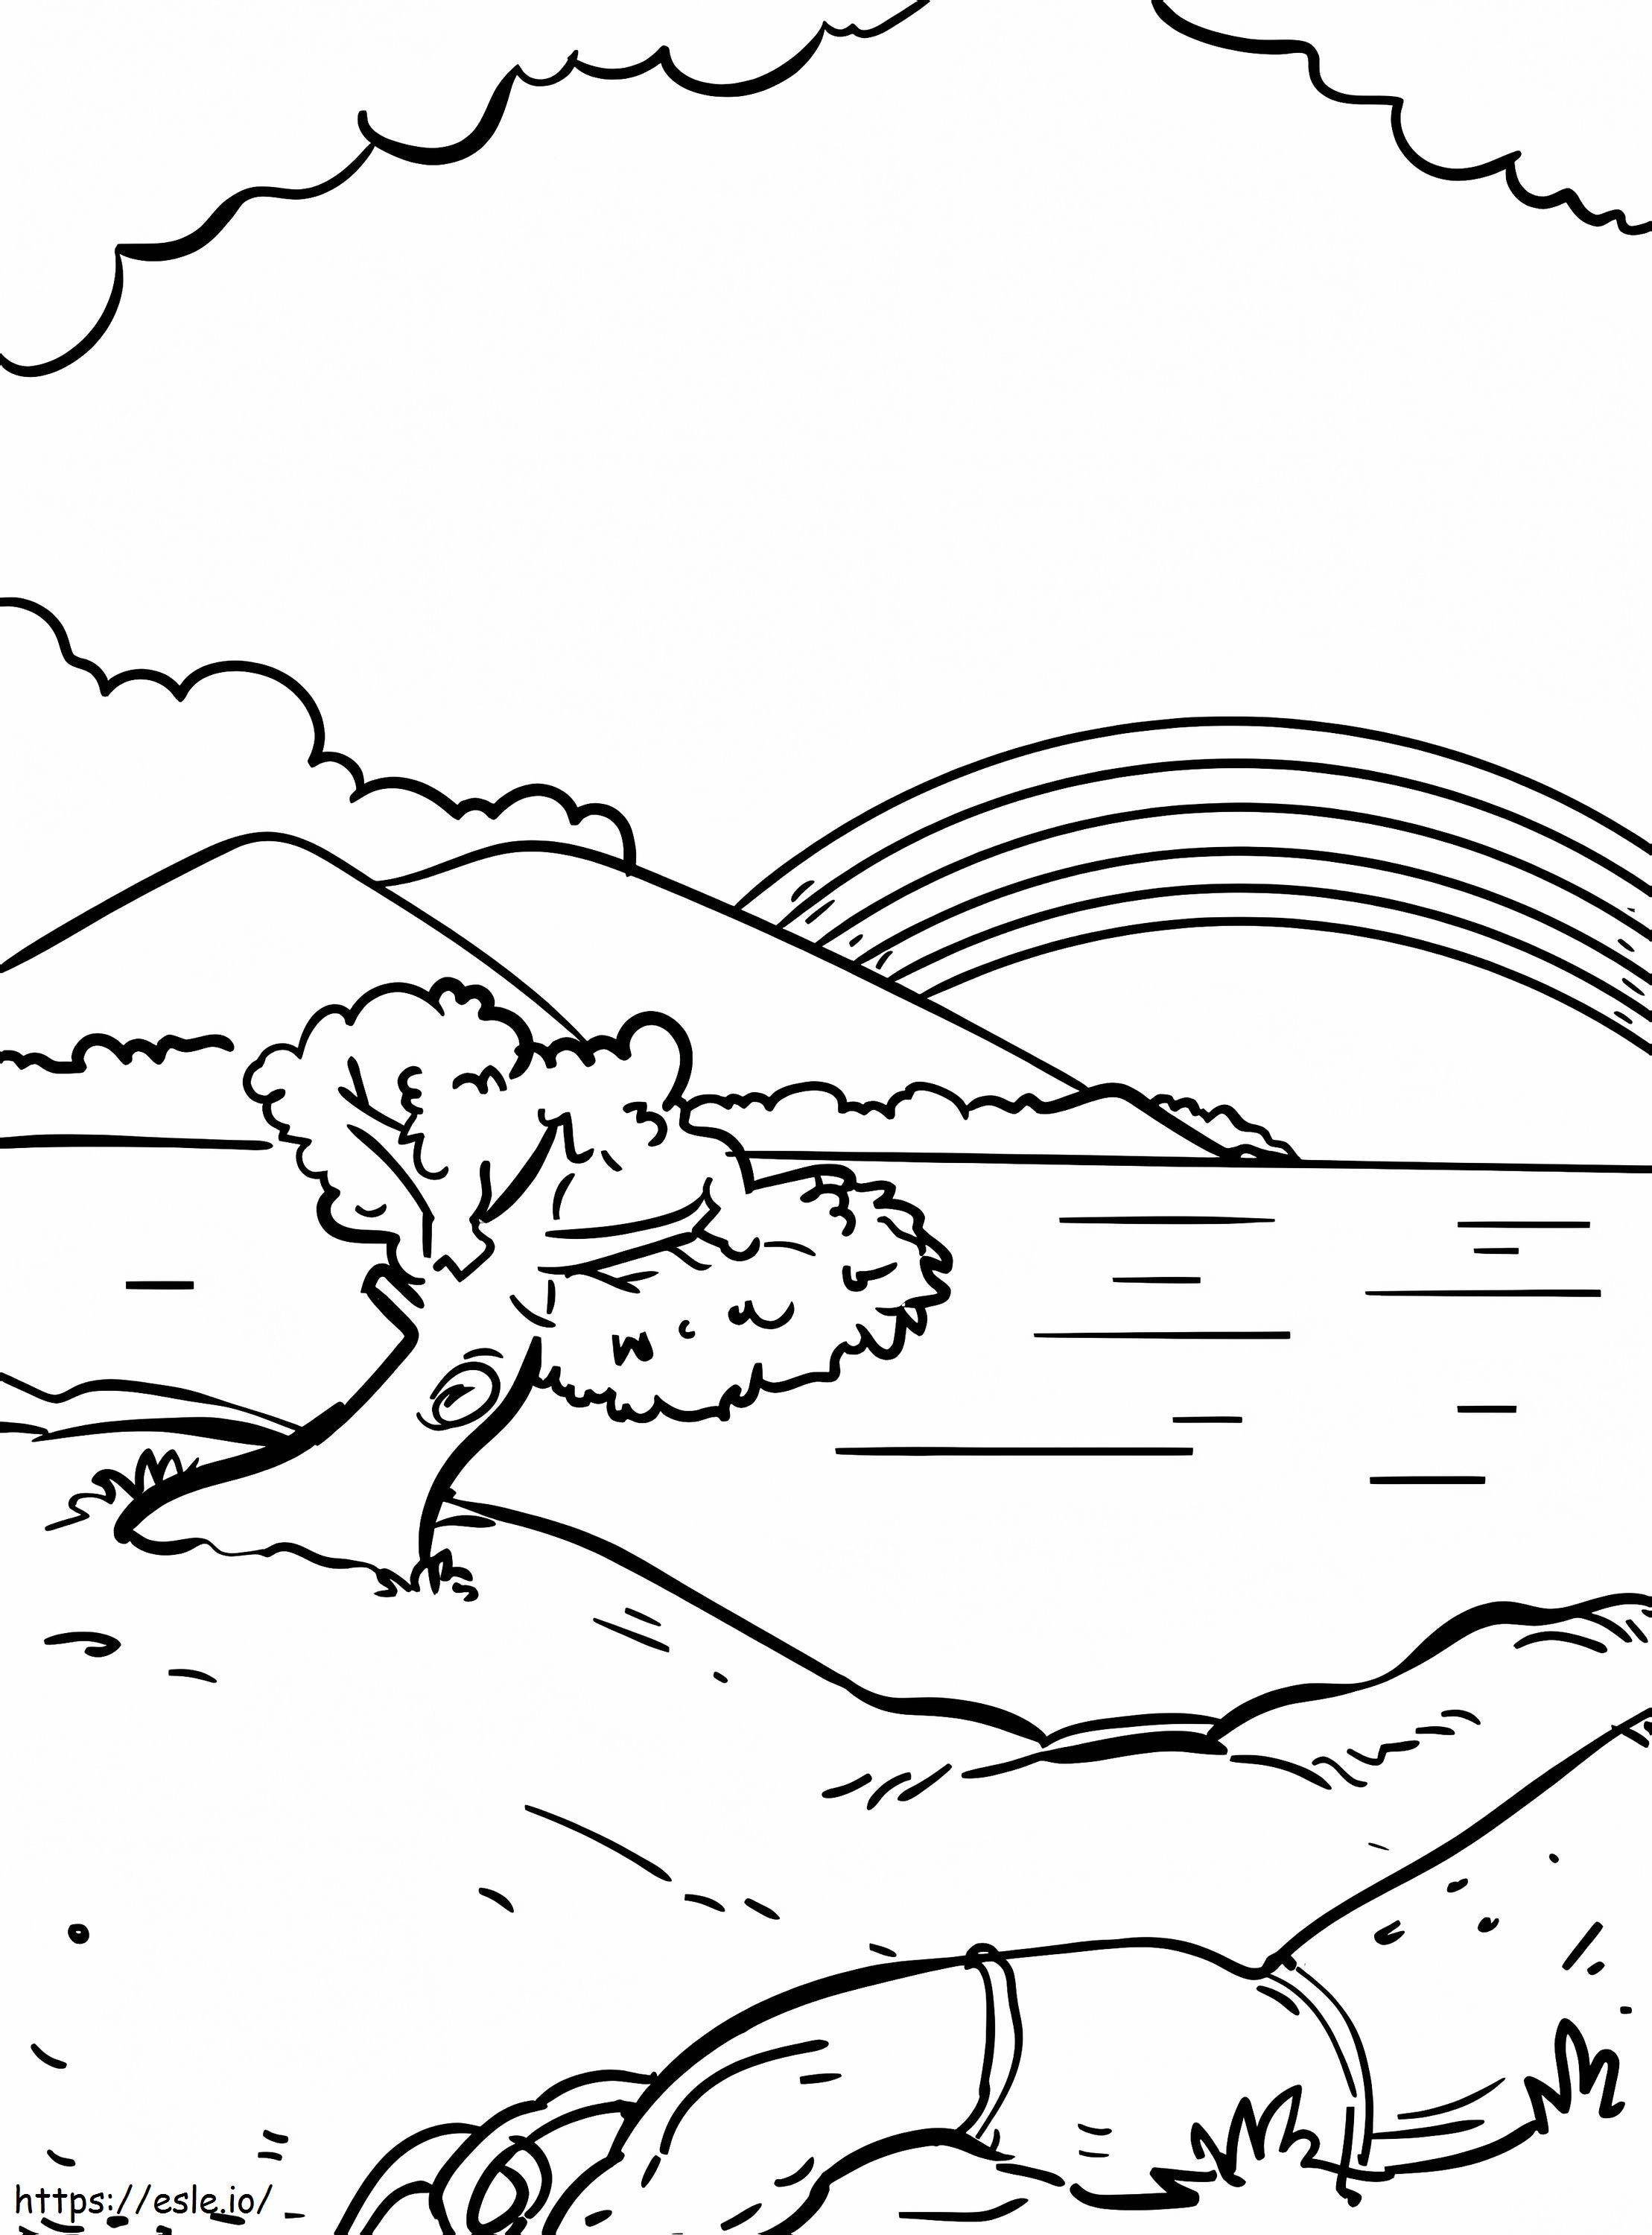 Peaceful Rainbow Scene coloring page